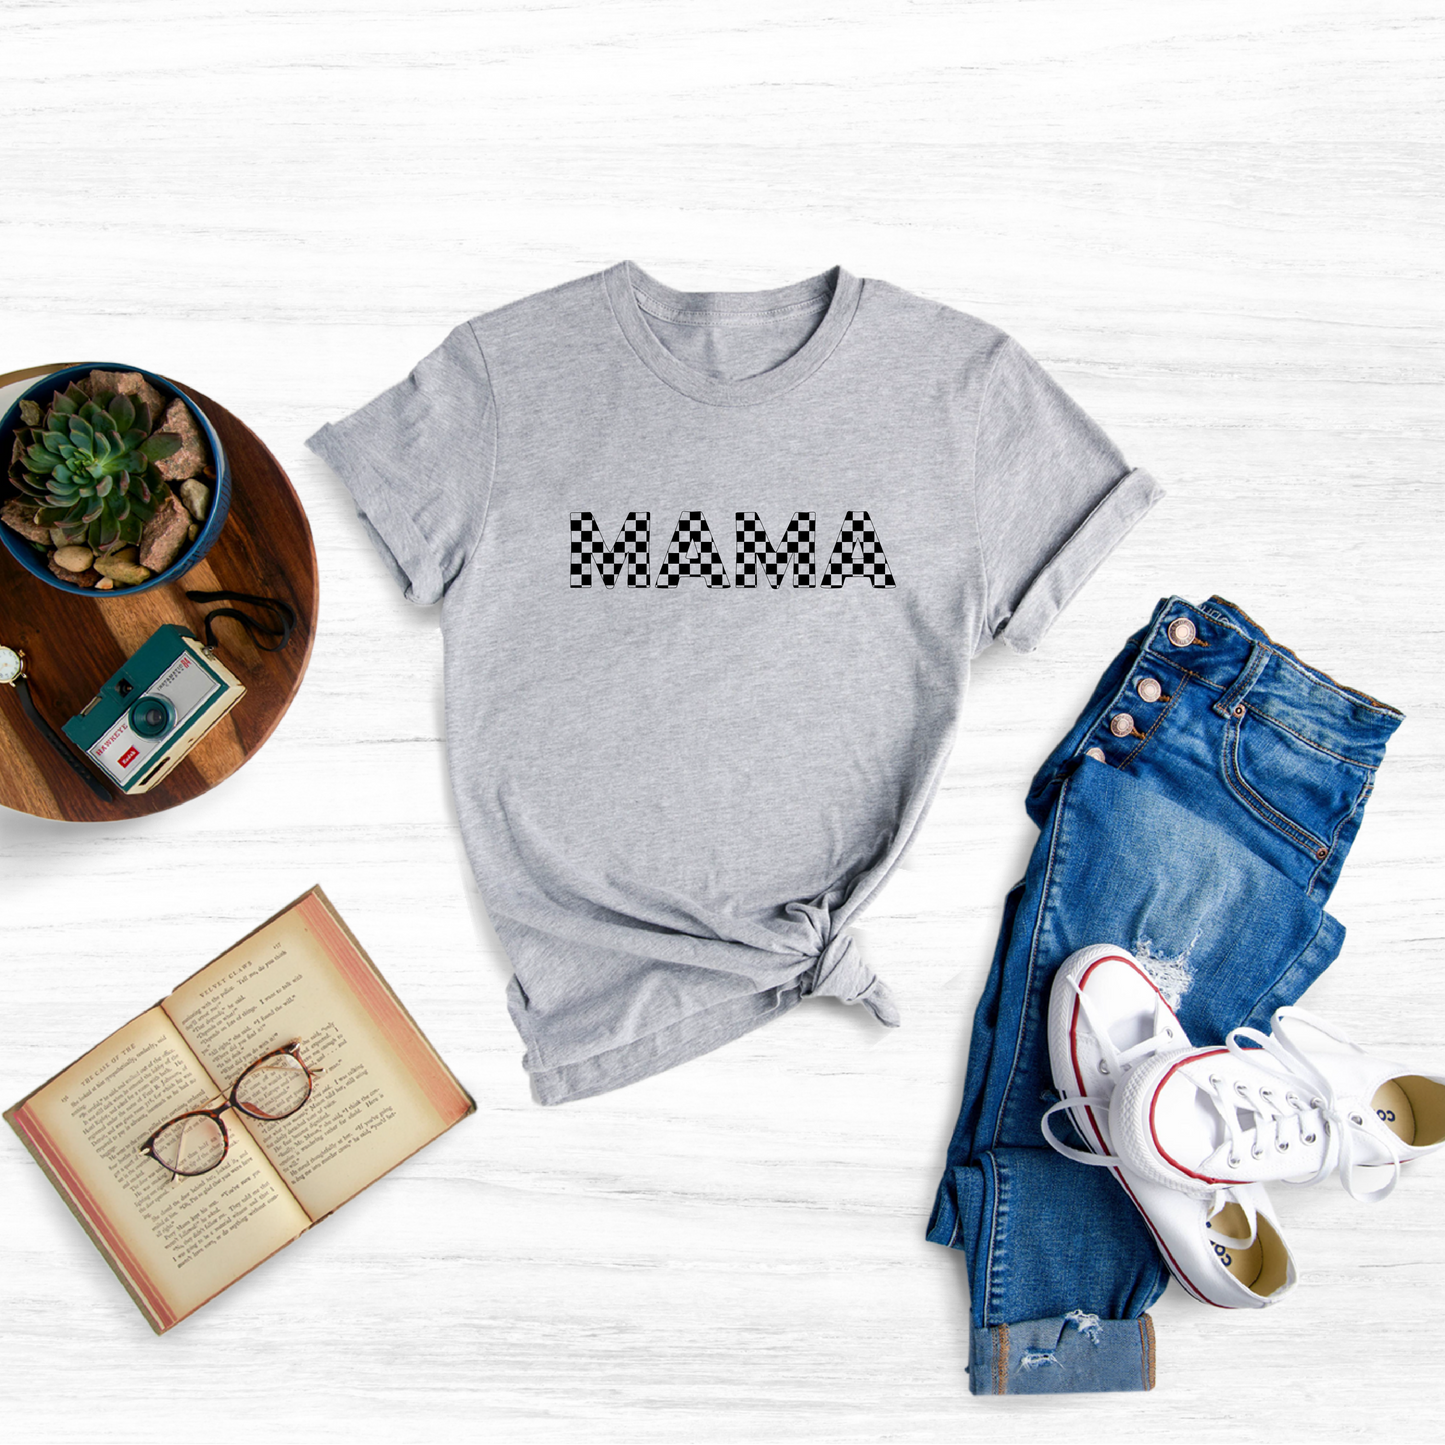 Retro Mama Shirt: A throwback tee for moms who love vintage style.